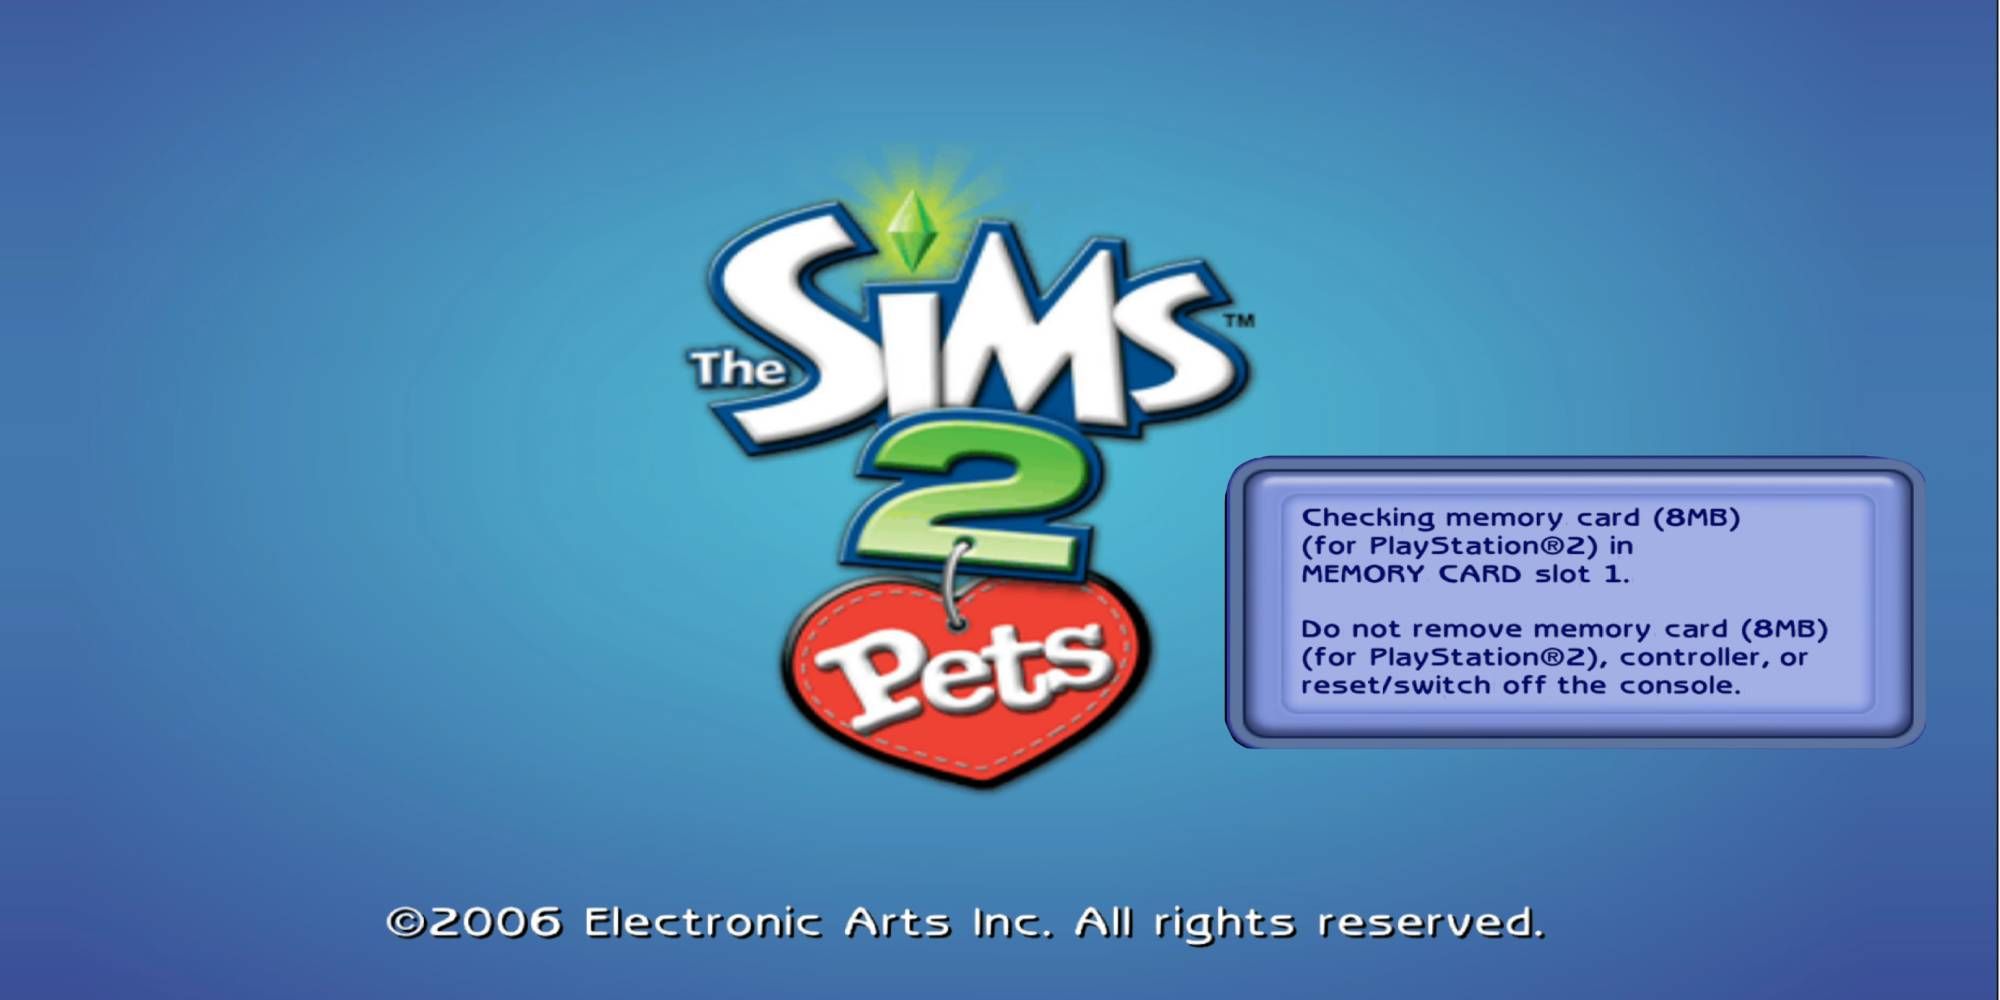 The Sims 2 PlayStation 2 in game loading screenshot with checking memory card message